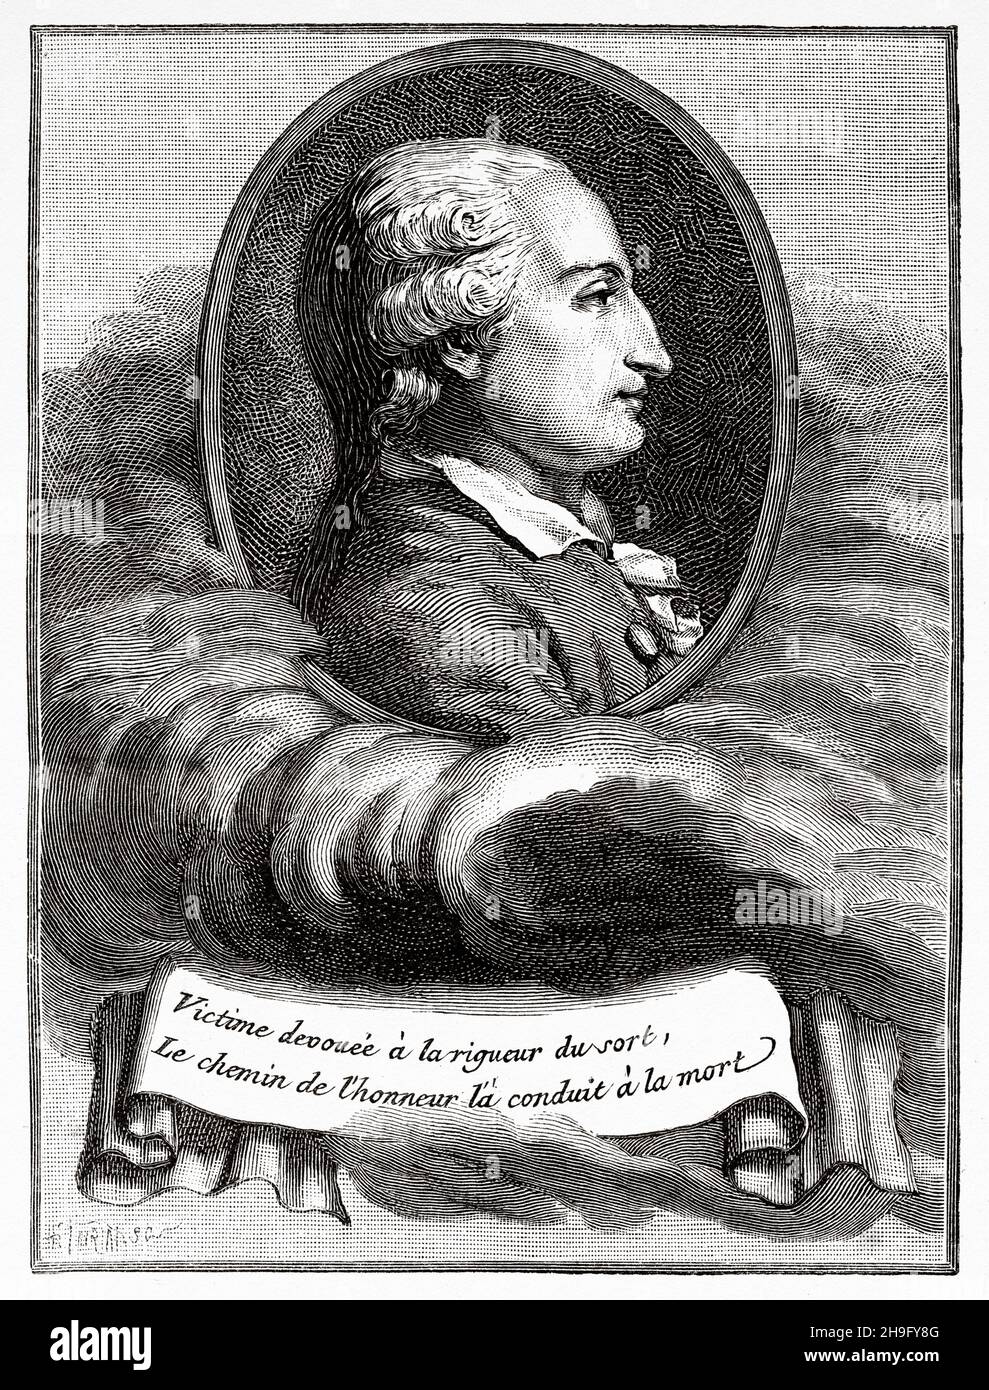 Jean-Francois Pilatre de Rozier (1754-1785) was a French chemistry and physics teacher, and one of the first pioneers of aviation. He and François Laurent d'Arlandes made the first manned free balloon flight on 21 November 1783, in a Montgolfier balloon, France. Old 19th century engraved illustration from La Nature 1885 Stock Photo